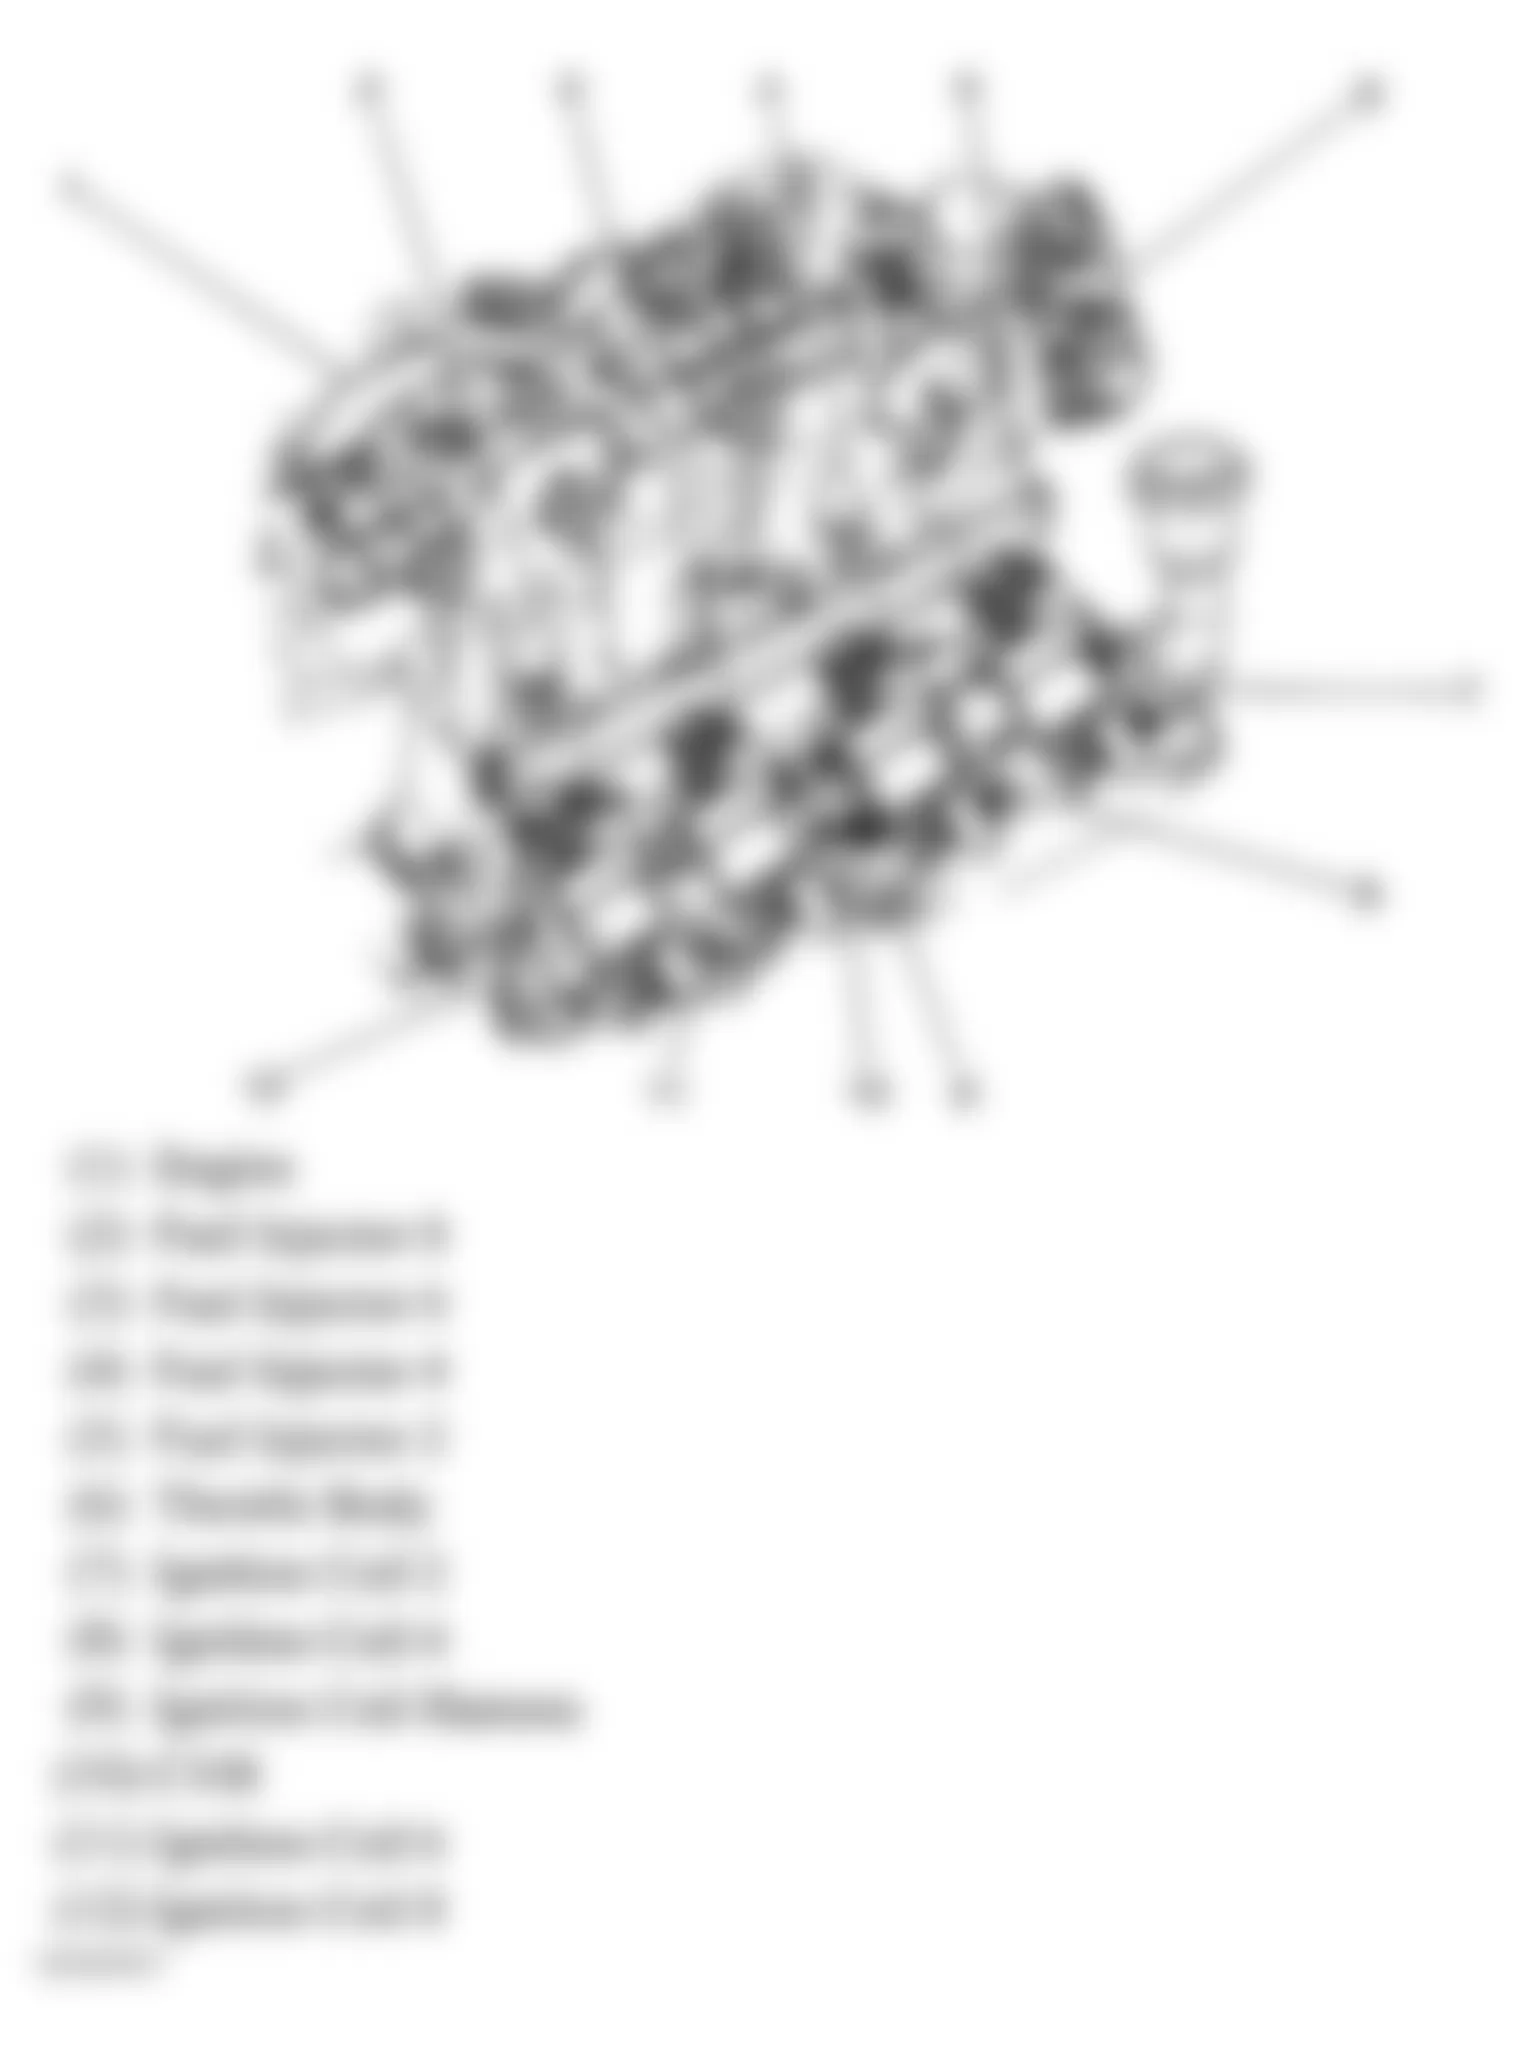 GMC Envoy 2005 - Component Locations -  Upper Right Side Of Engine (5.3L)